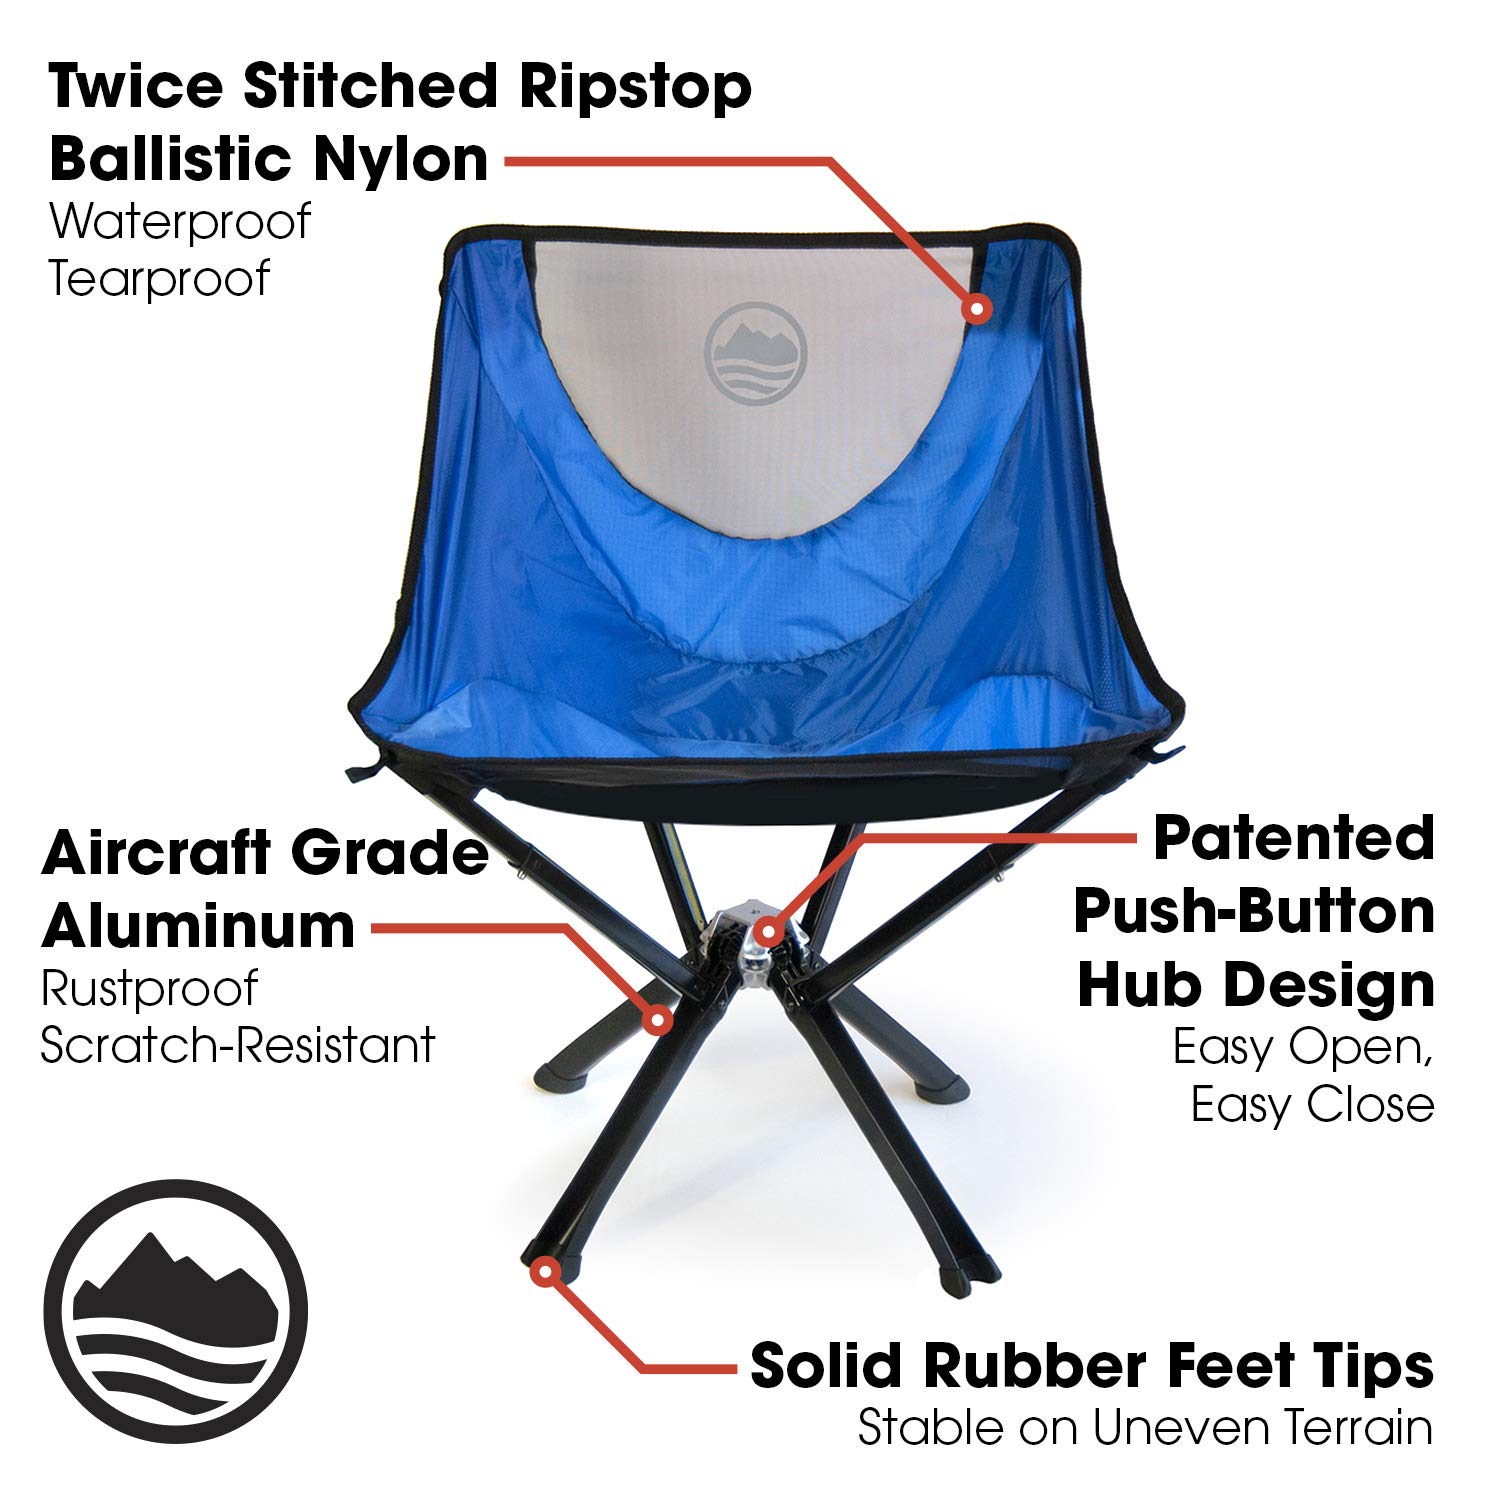 CLIQ Portable Chair Camping Chairs - A Small Collapsible Portable Chair That Goes Every Where Outdoors. Compact Folding Chair for Adults That Sets Up in 5 Seconds | Camping Chair Supports 300 Lbs